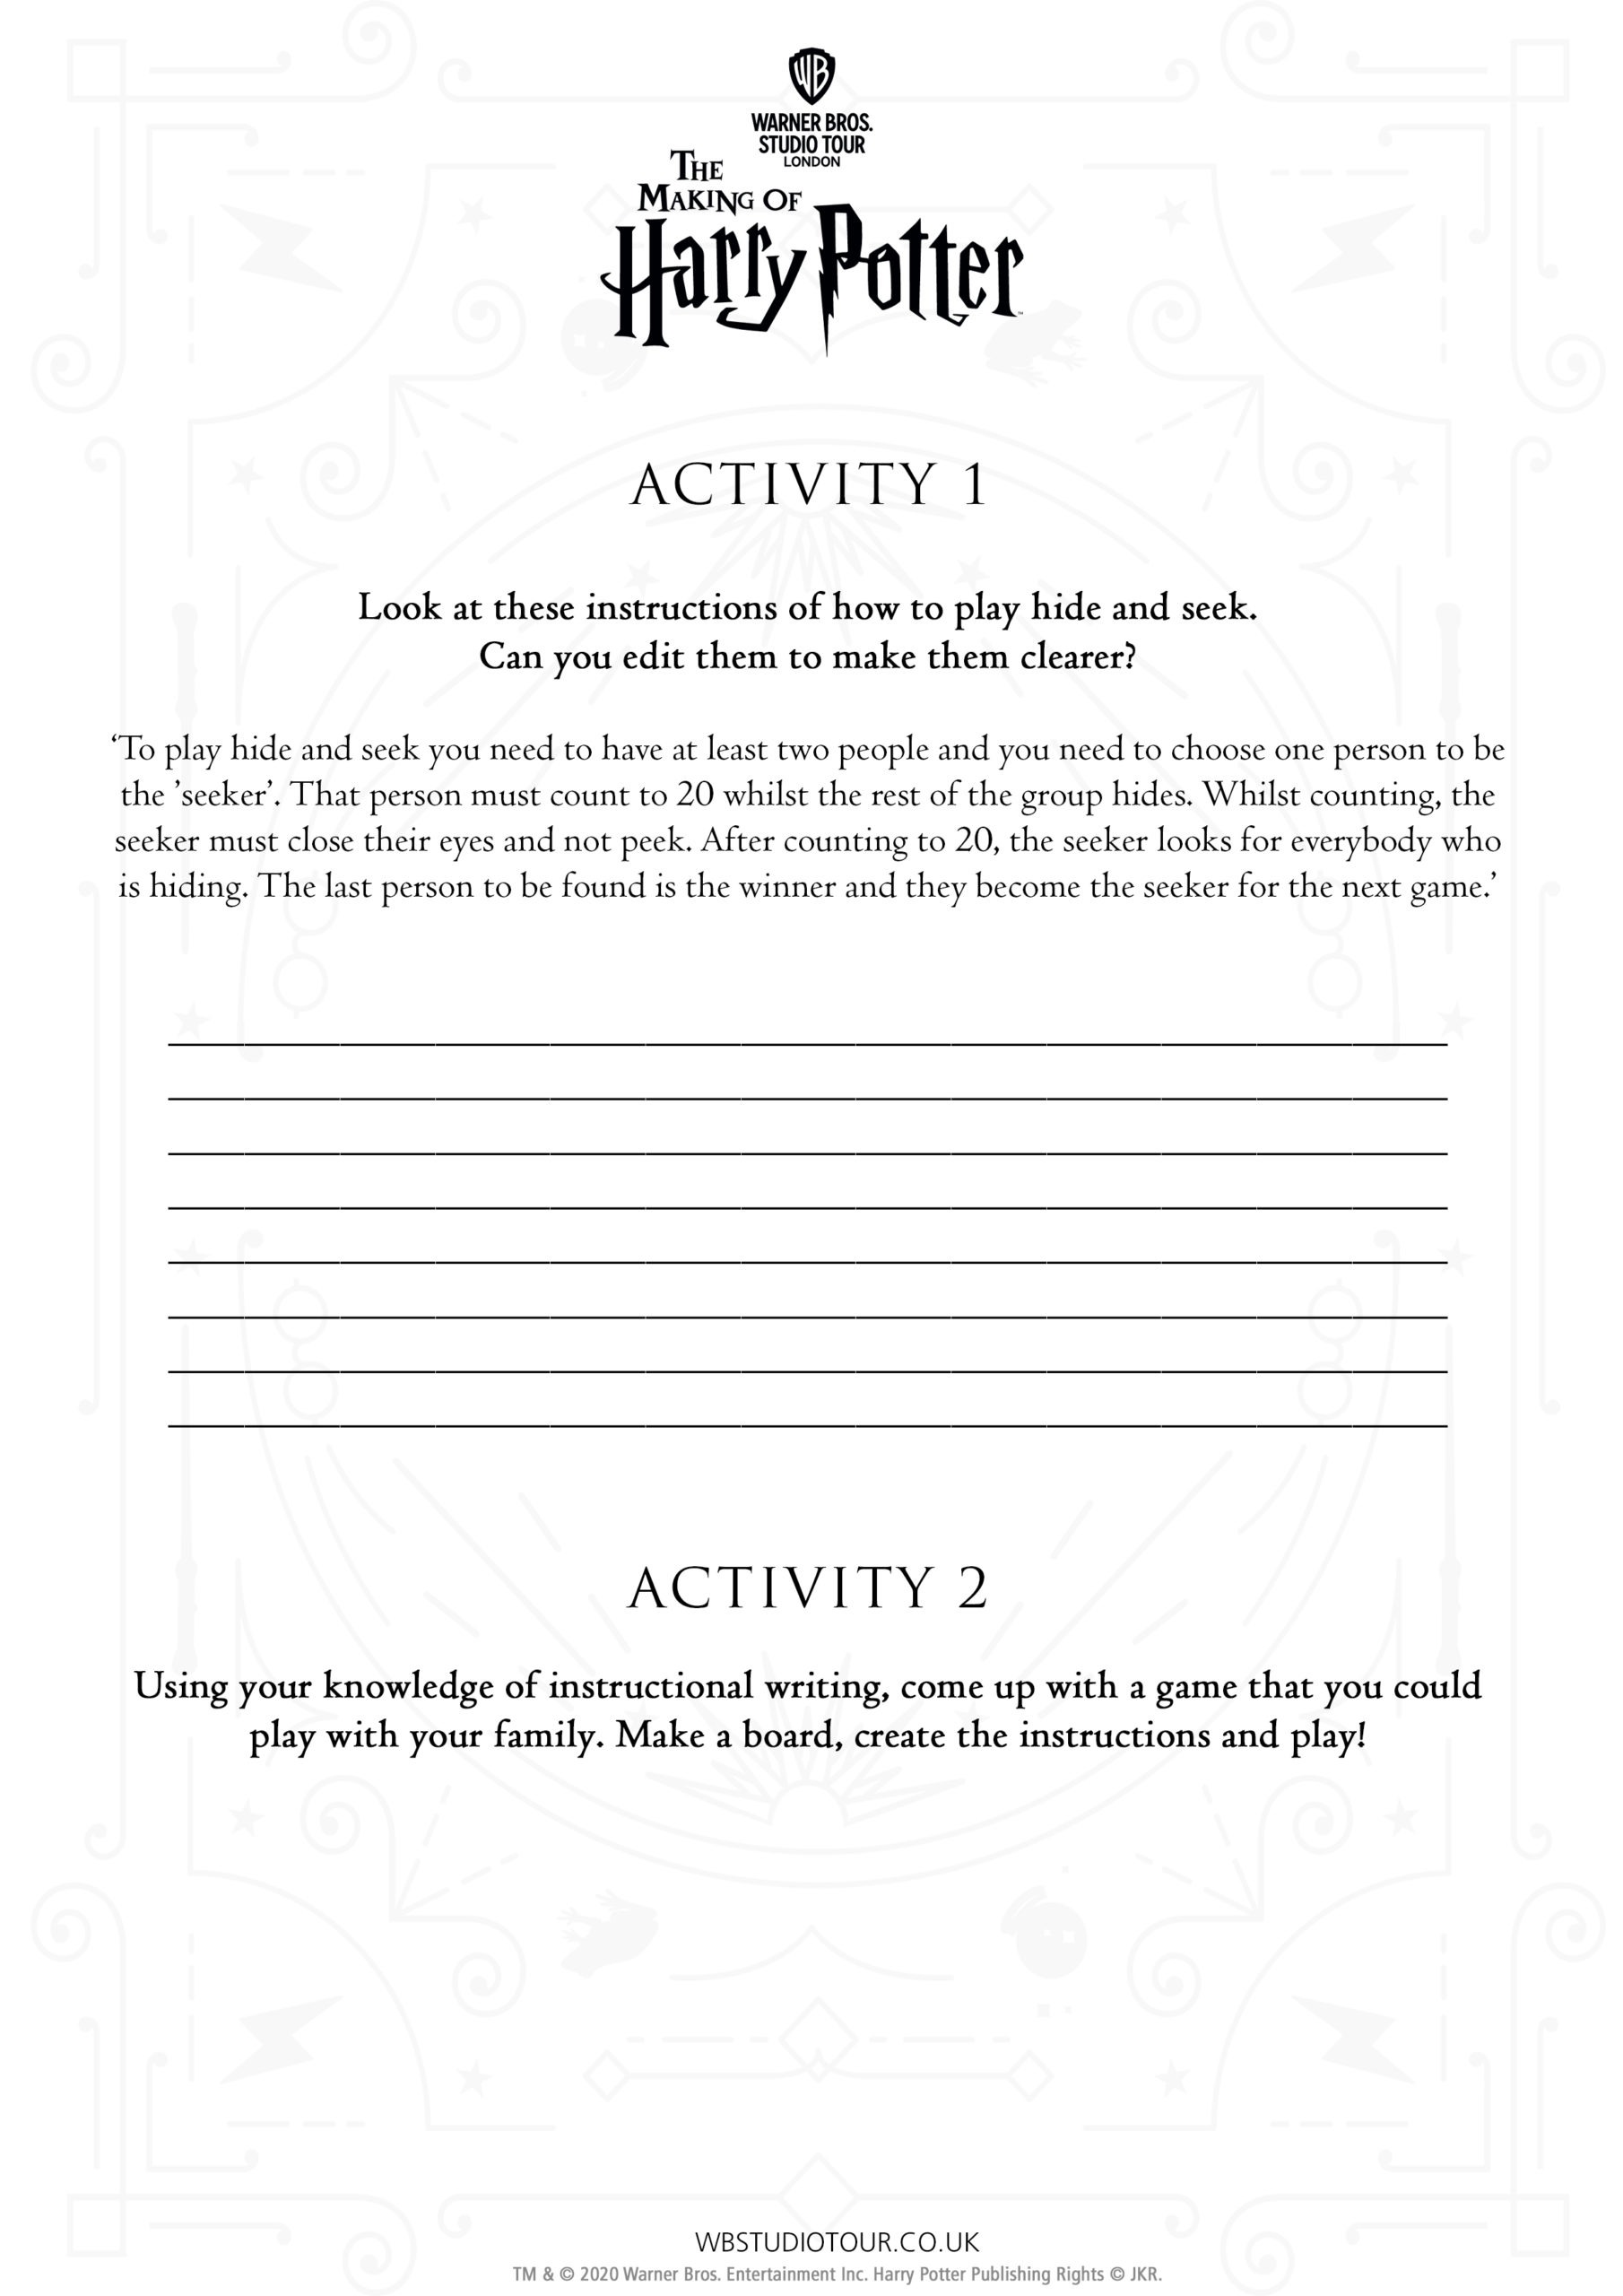 Instructional Writing activity worksheets page 2 - Studio Tour at Home